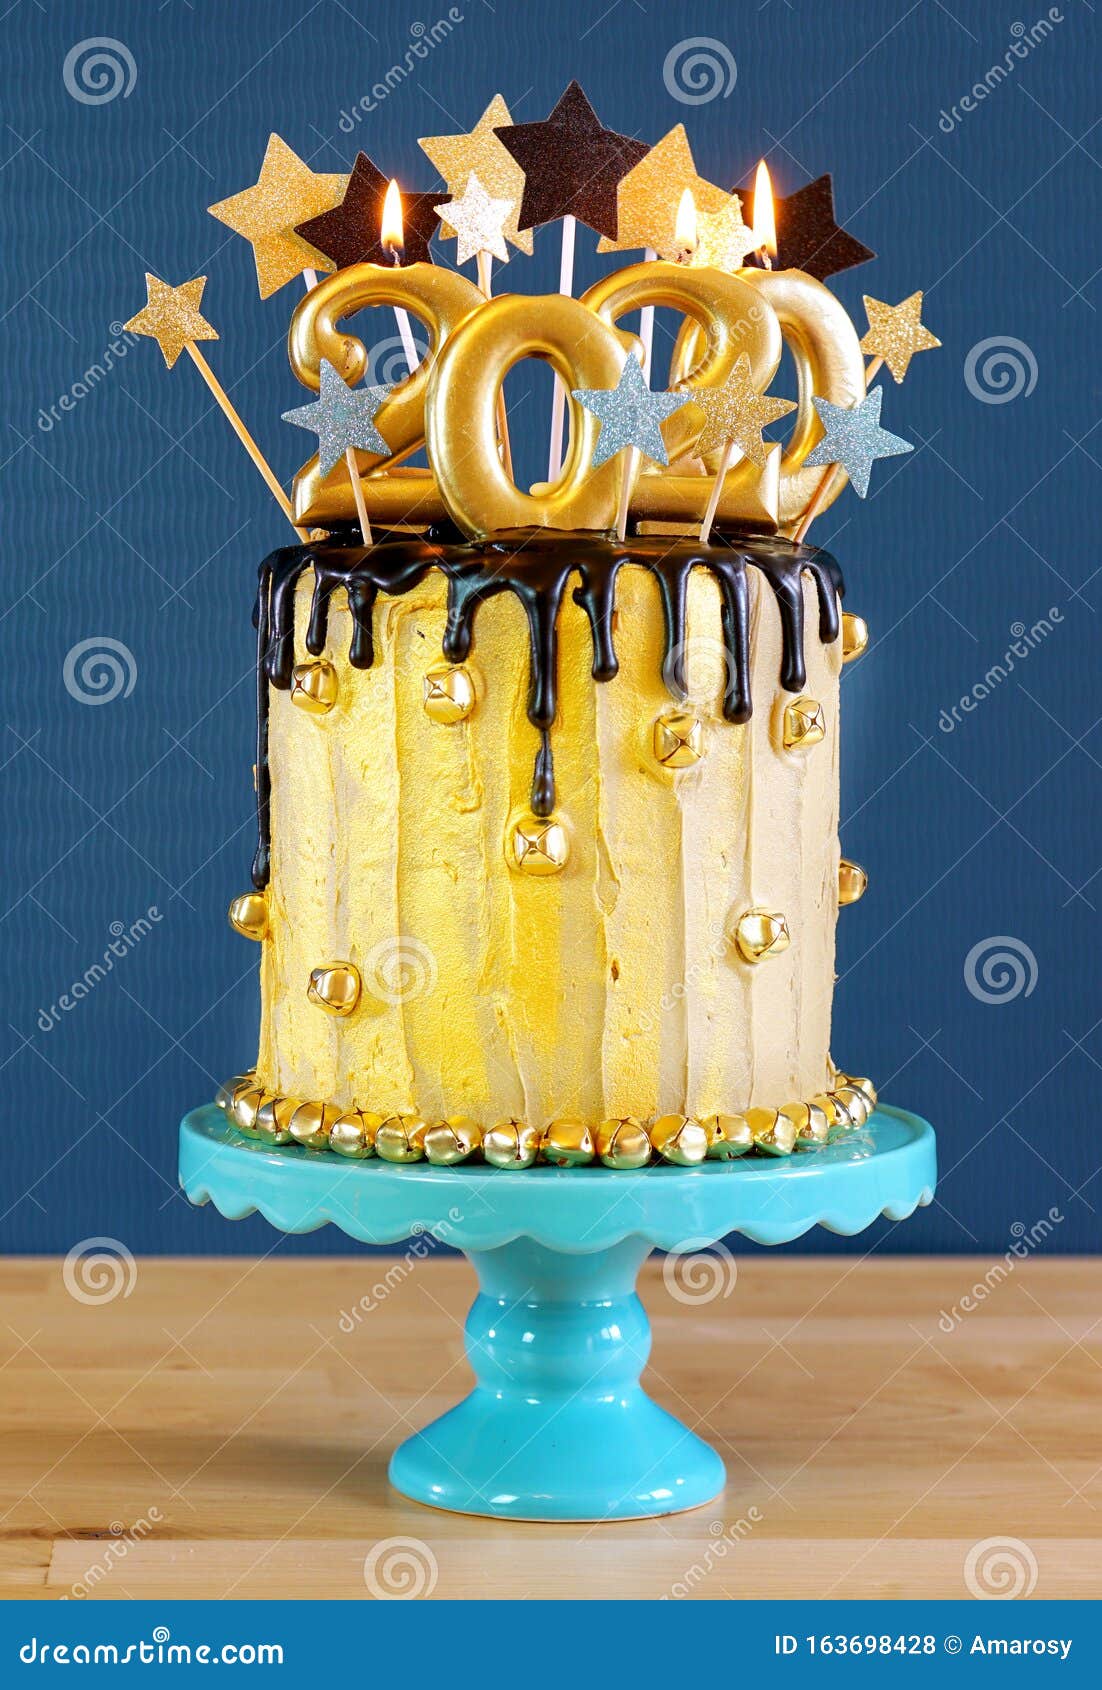 Happy New Year 2020 Black and Gold Drip Cake. Stock Photo - Image ...